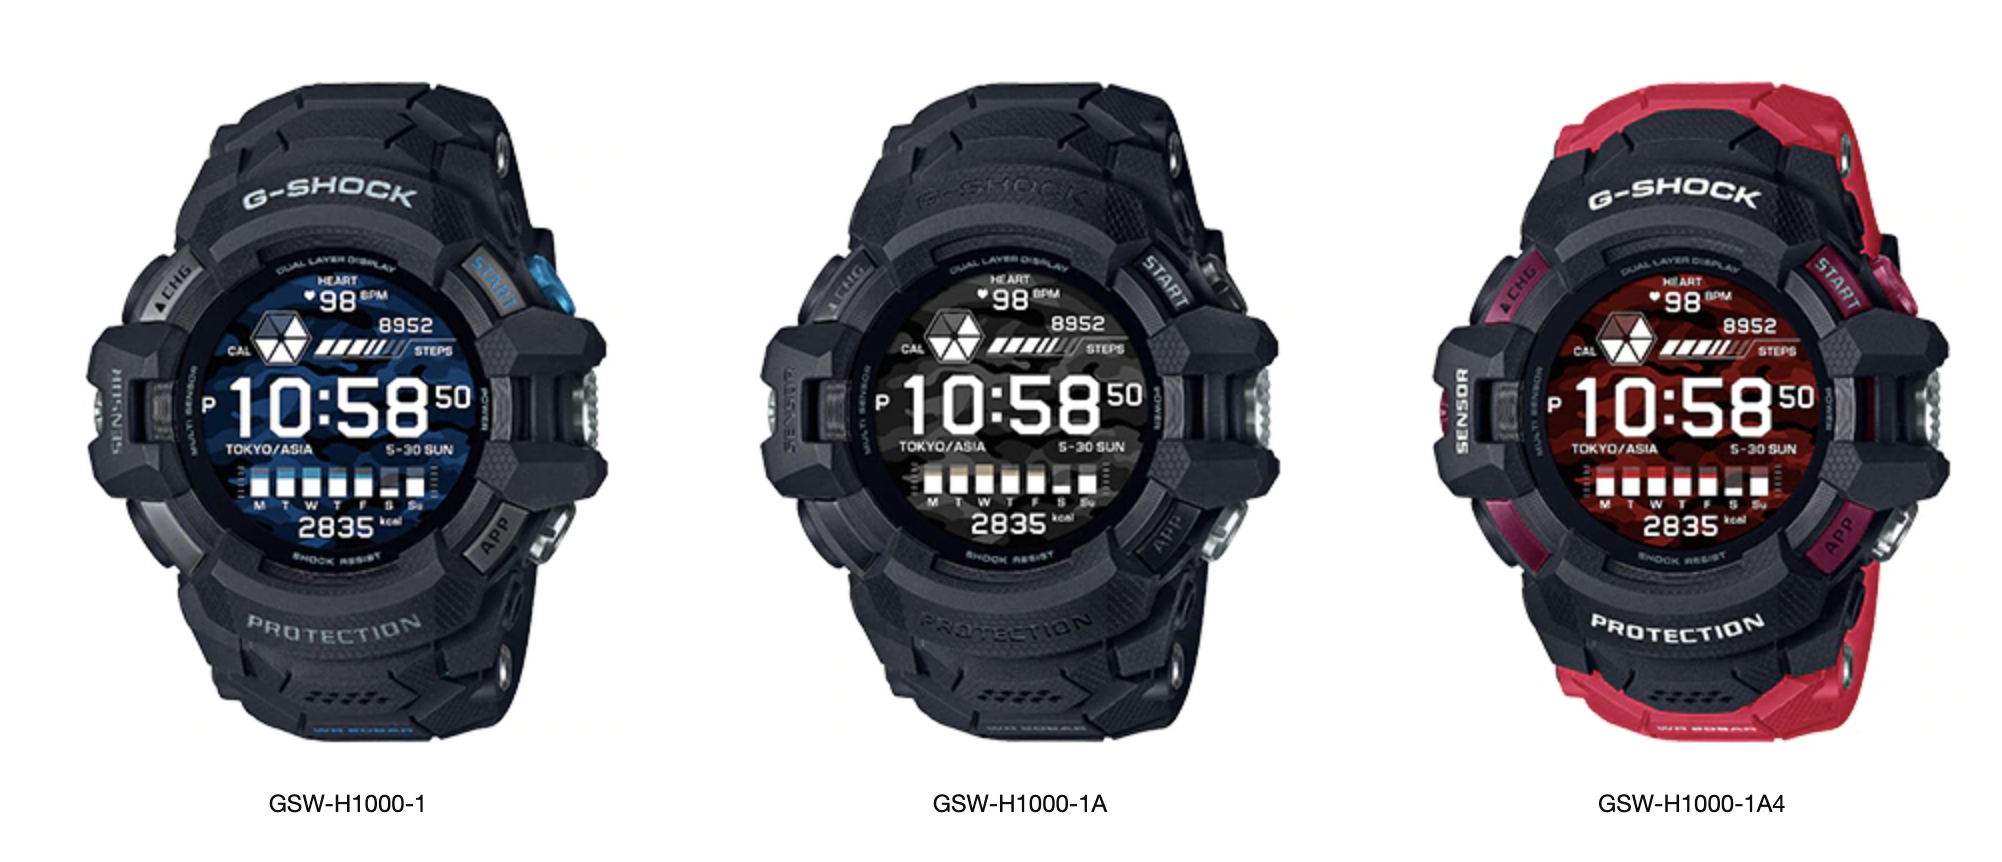 Casio to release first G-SHOCK smartwatch with Wear OS by Google Japan Today